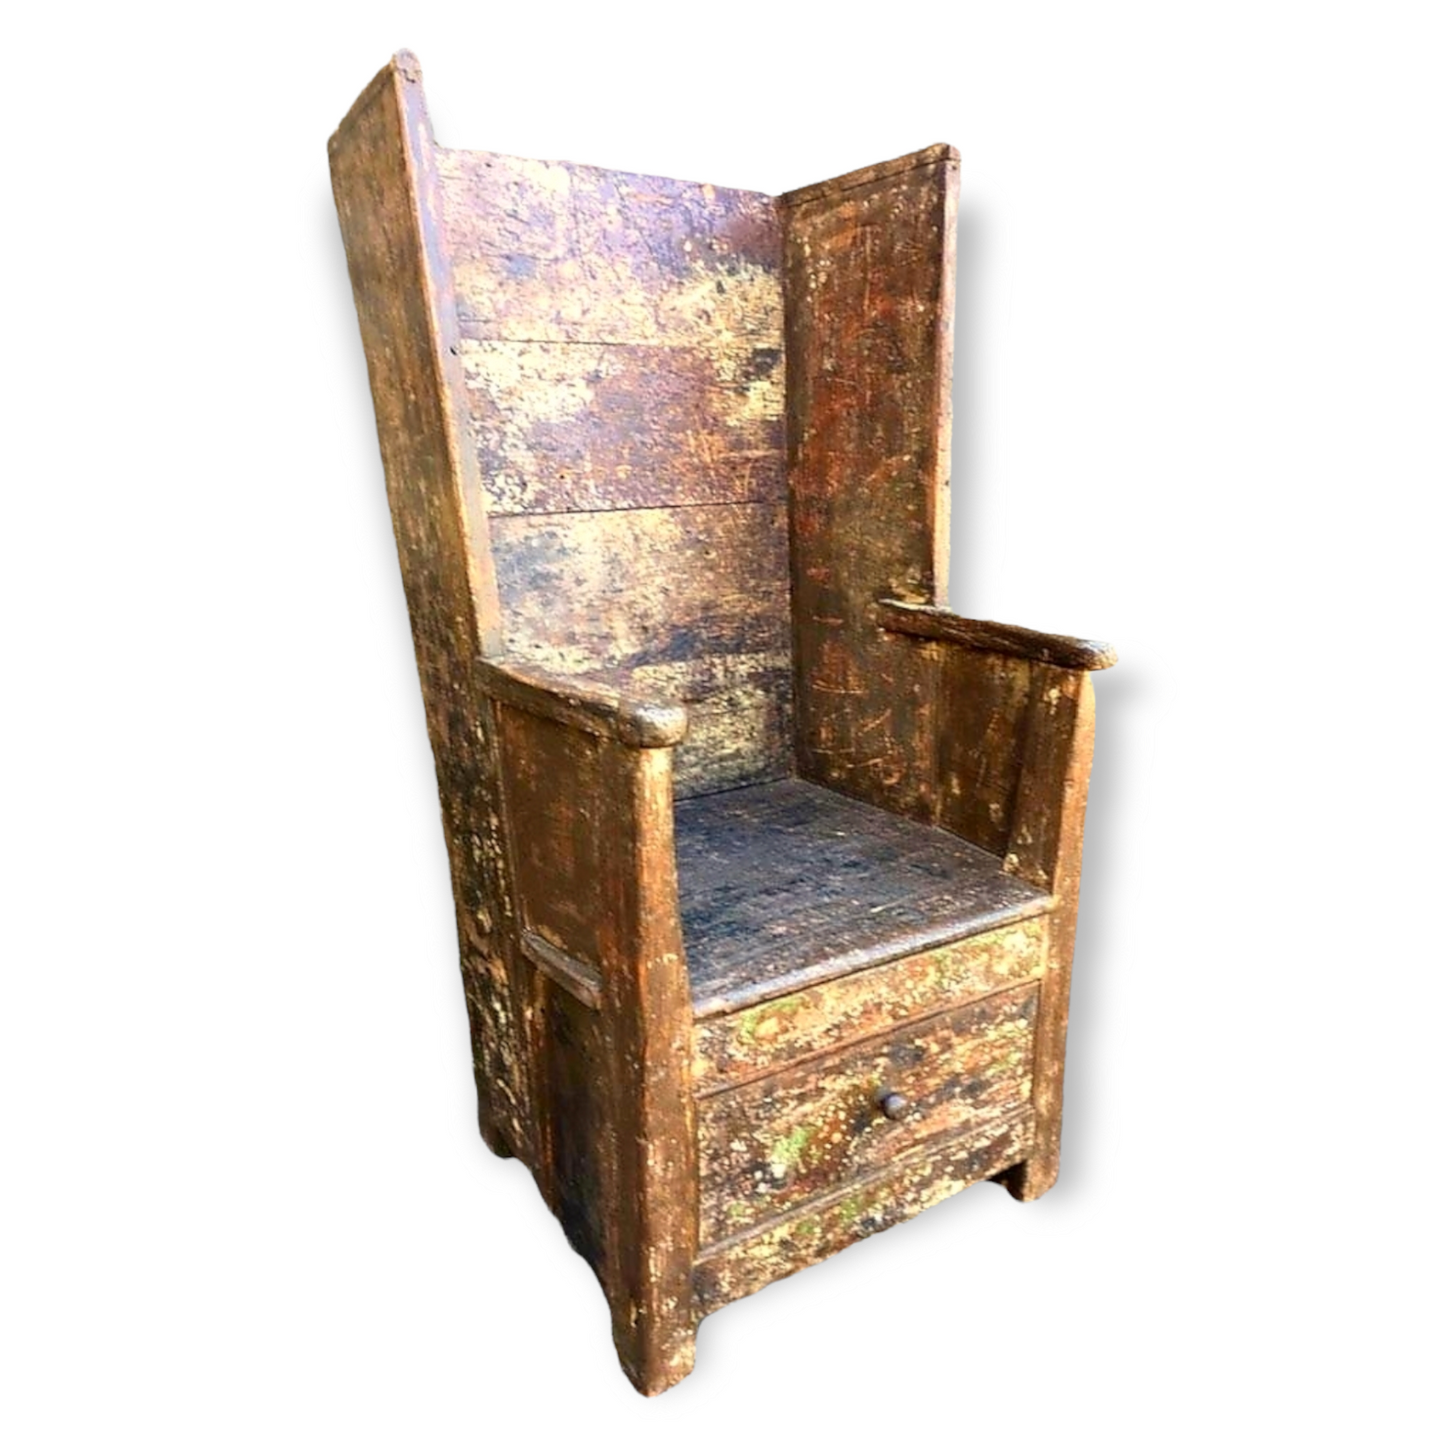 Scottish Vernacular Furniture - A Late 18thC Style Scottish Antique Pine Boarded "Orkney" Lambing Chair